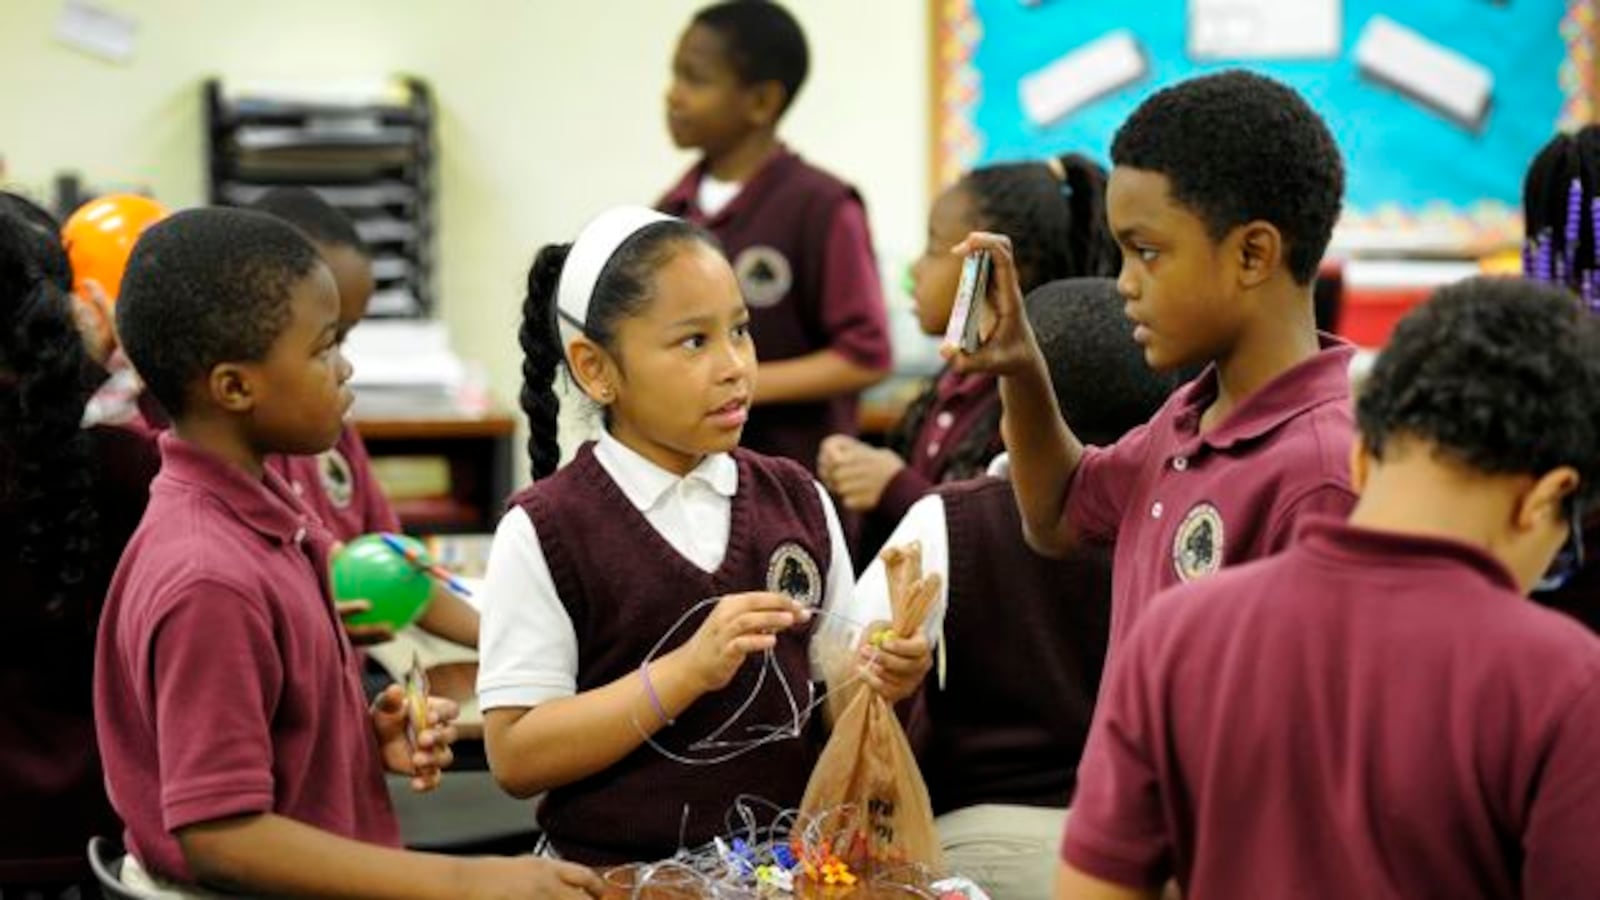 Schools in the Tindley network are among the most racially isolated in the city.